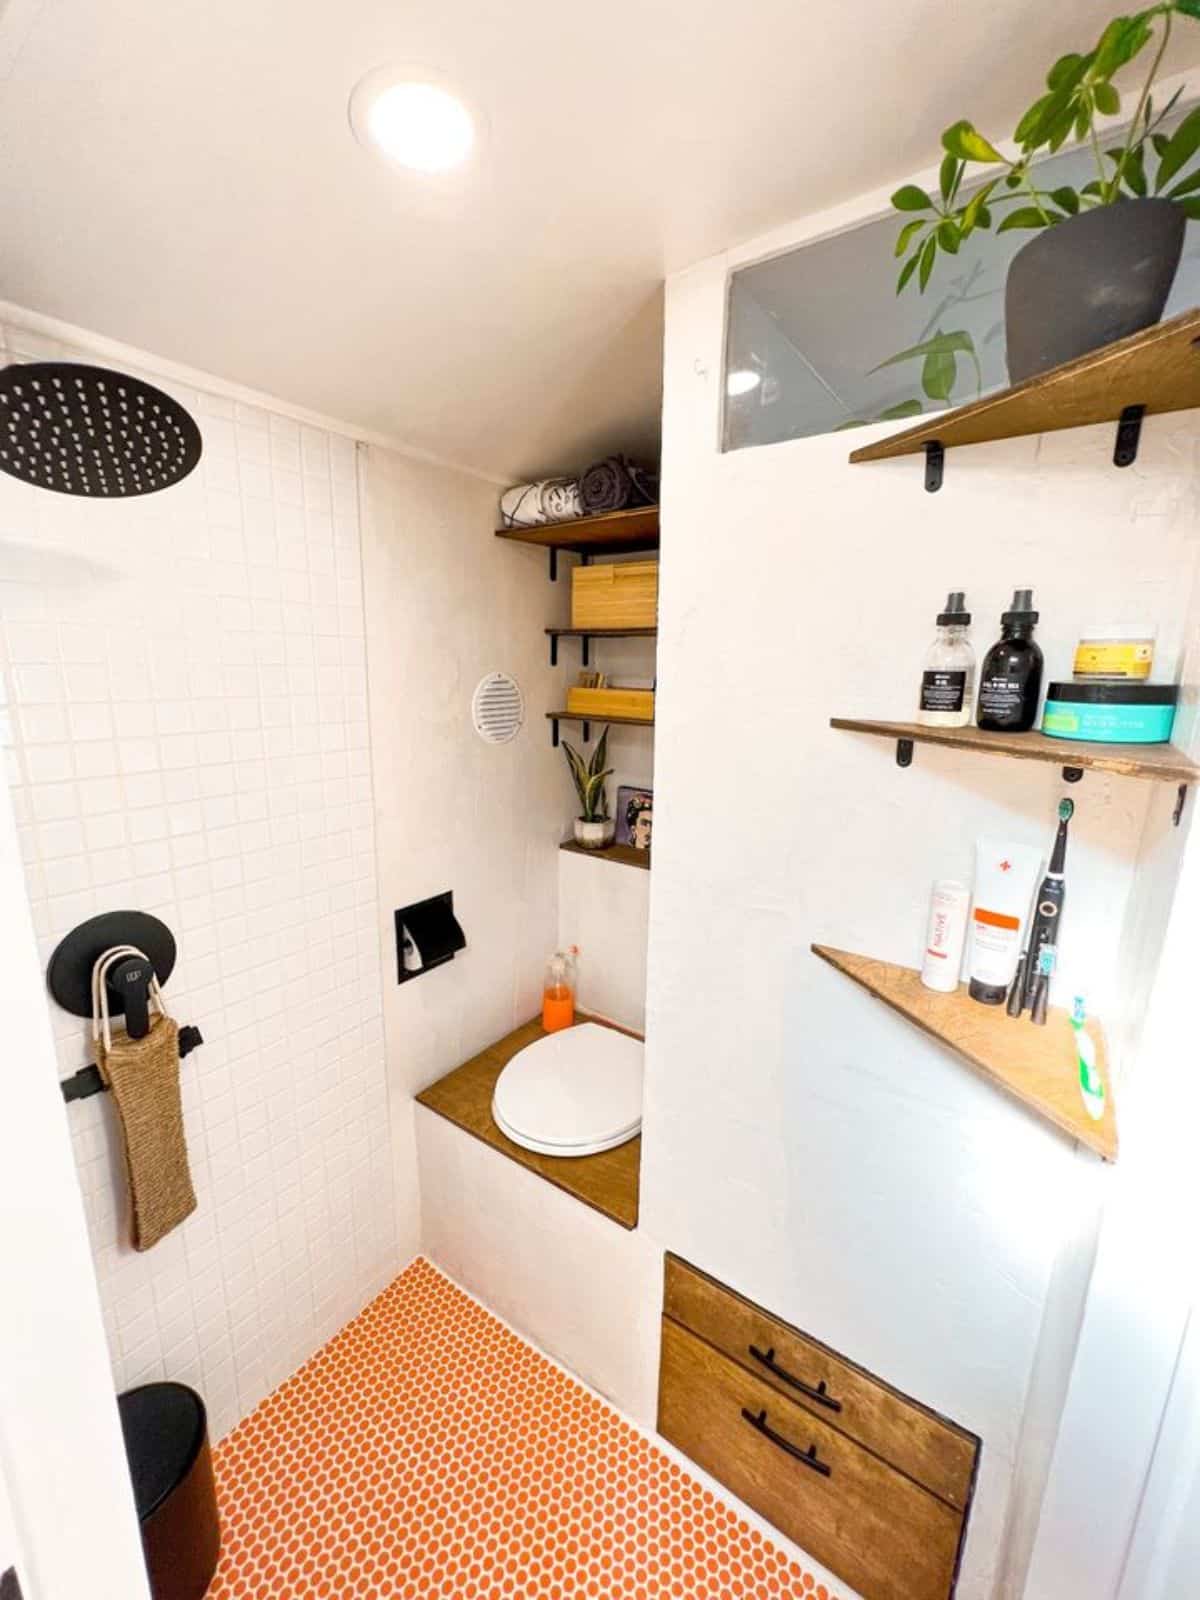 bathroom of tiny motorhome is well organized with standard fittings and composting toilet